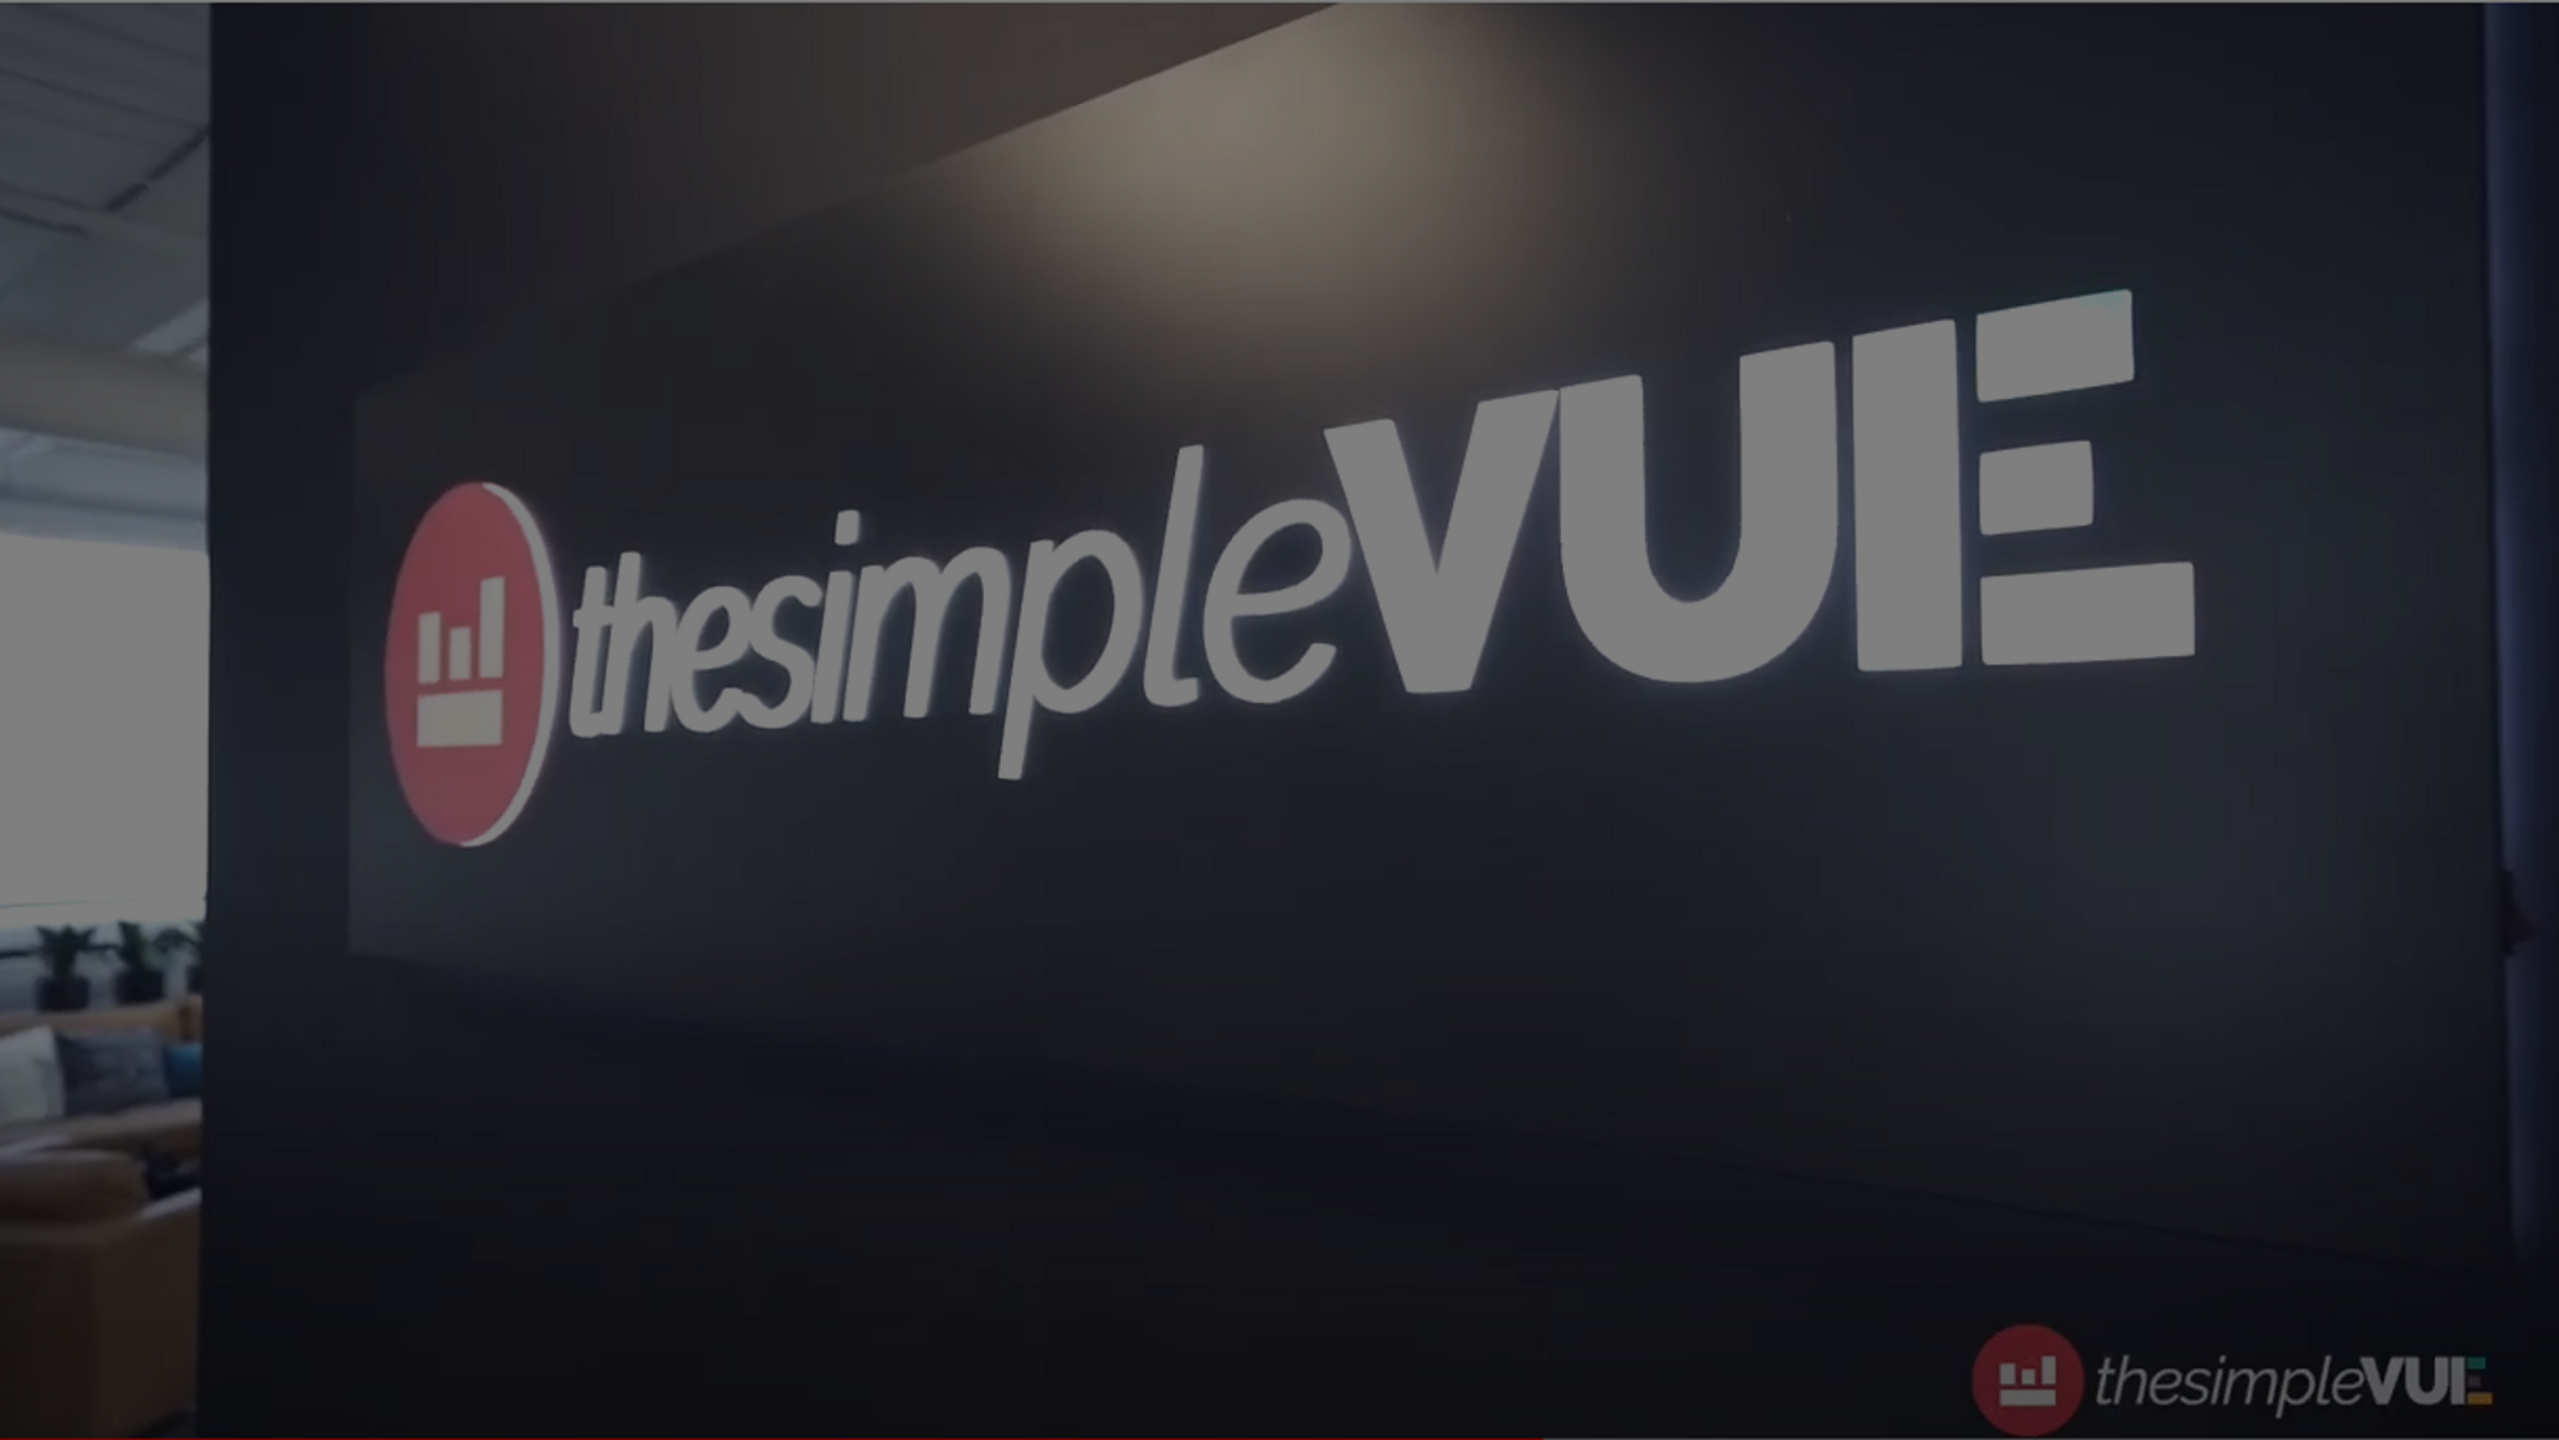 About The Simple VUE